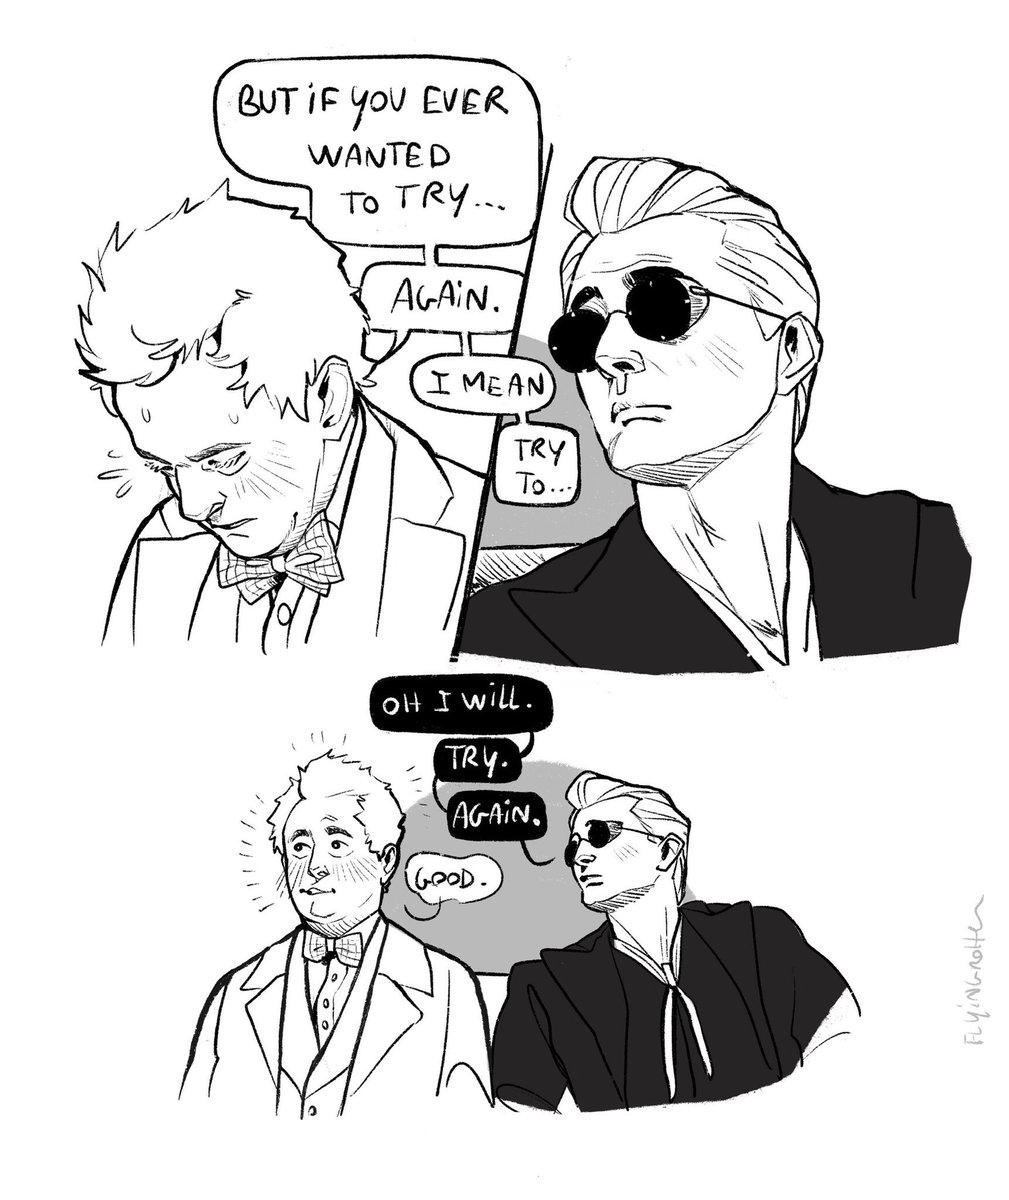 Back on the bench 🪶
#GoodOmens 